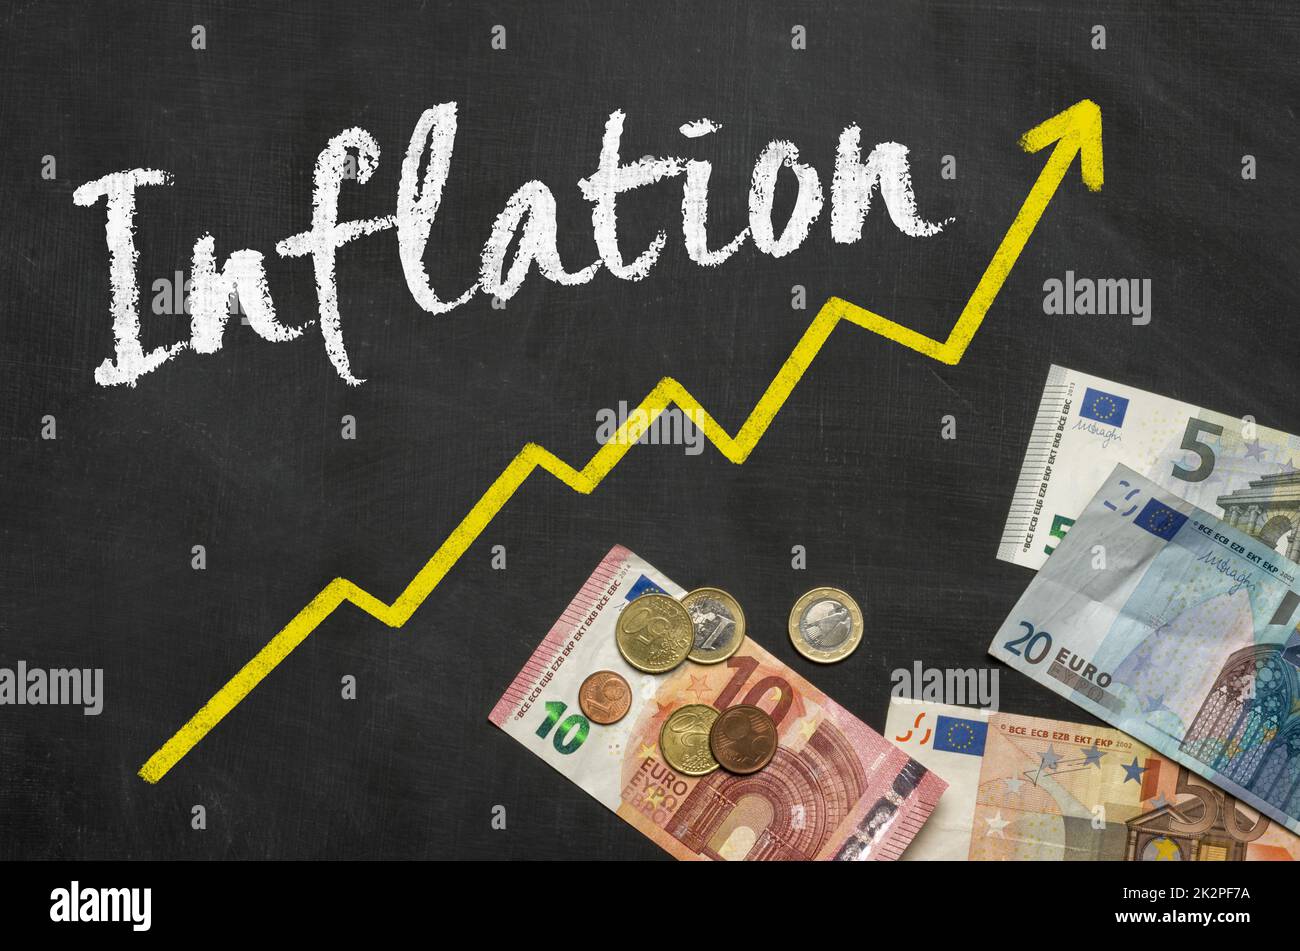 Text on blackboard with Euros- Inflation Stock Photo